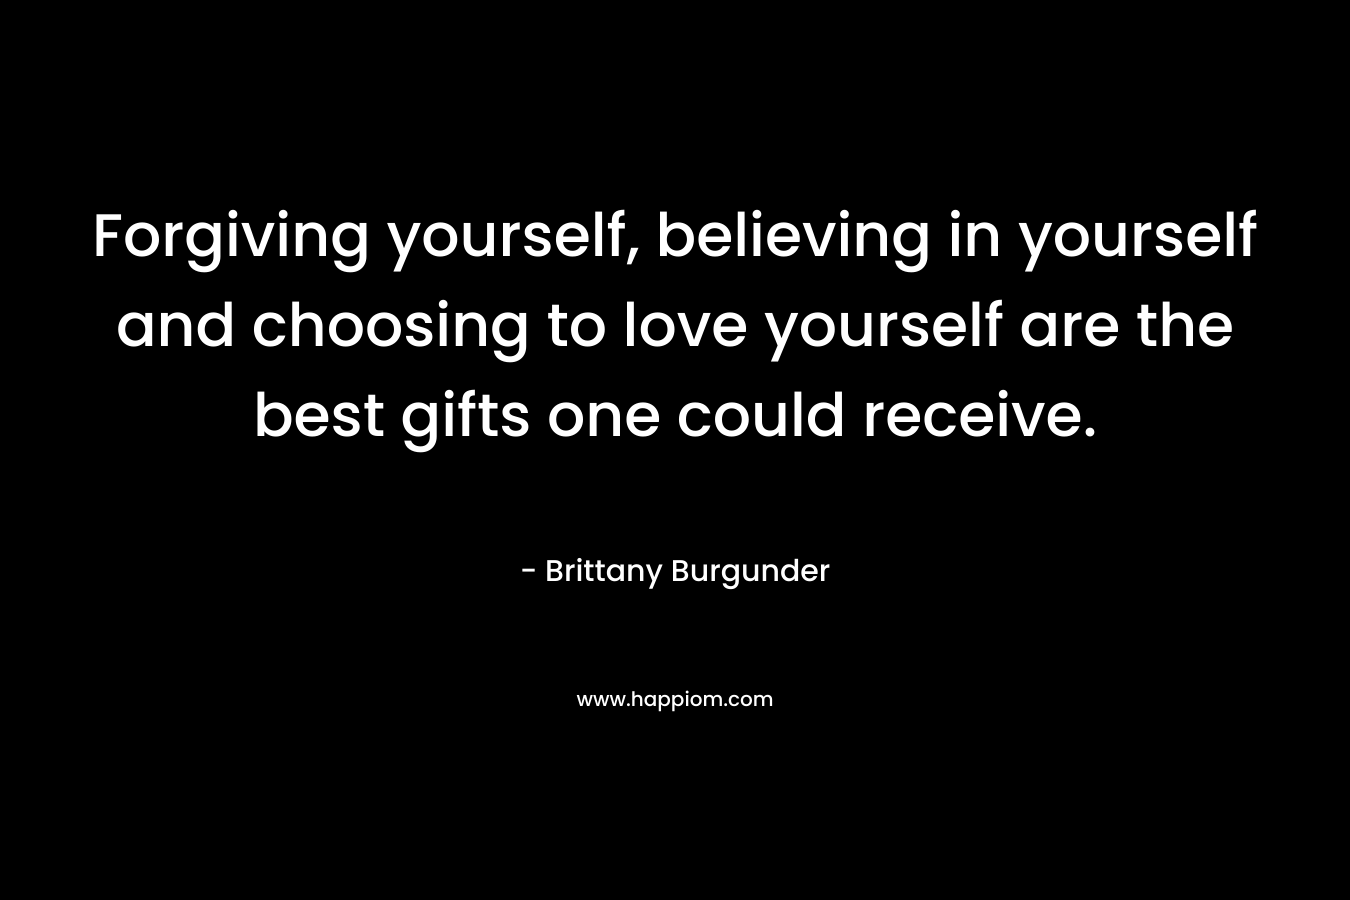 Forgiving yourself, believing in yourself and choosing to love yourself are the best gifts one could receive.